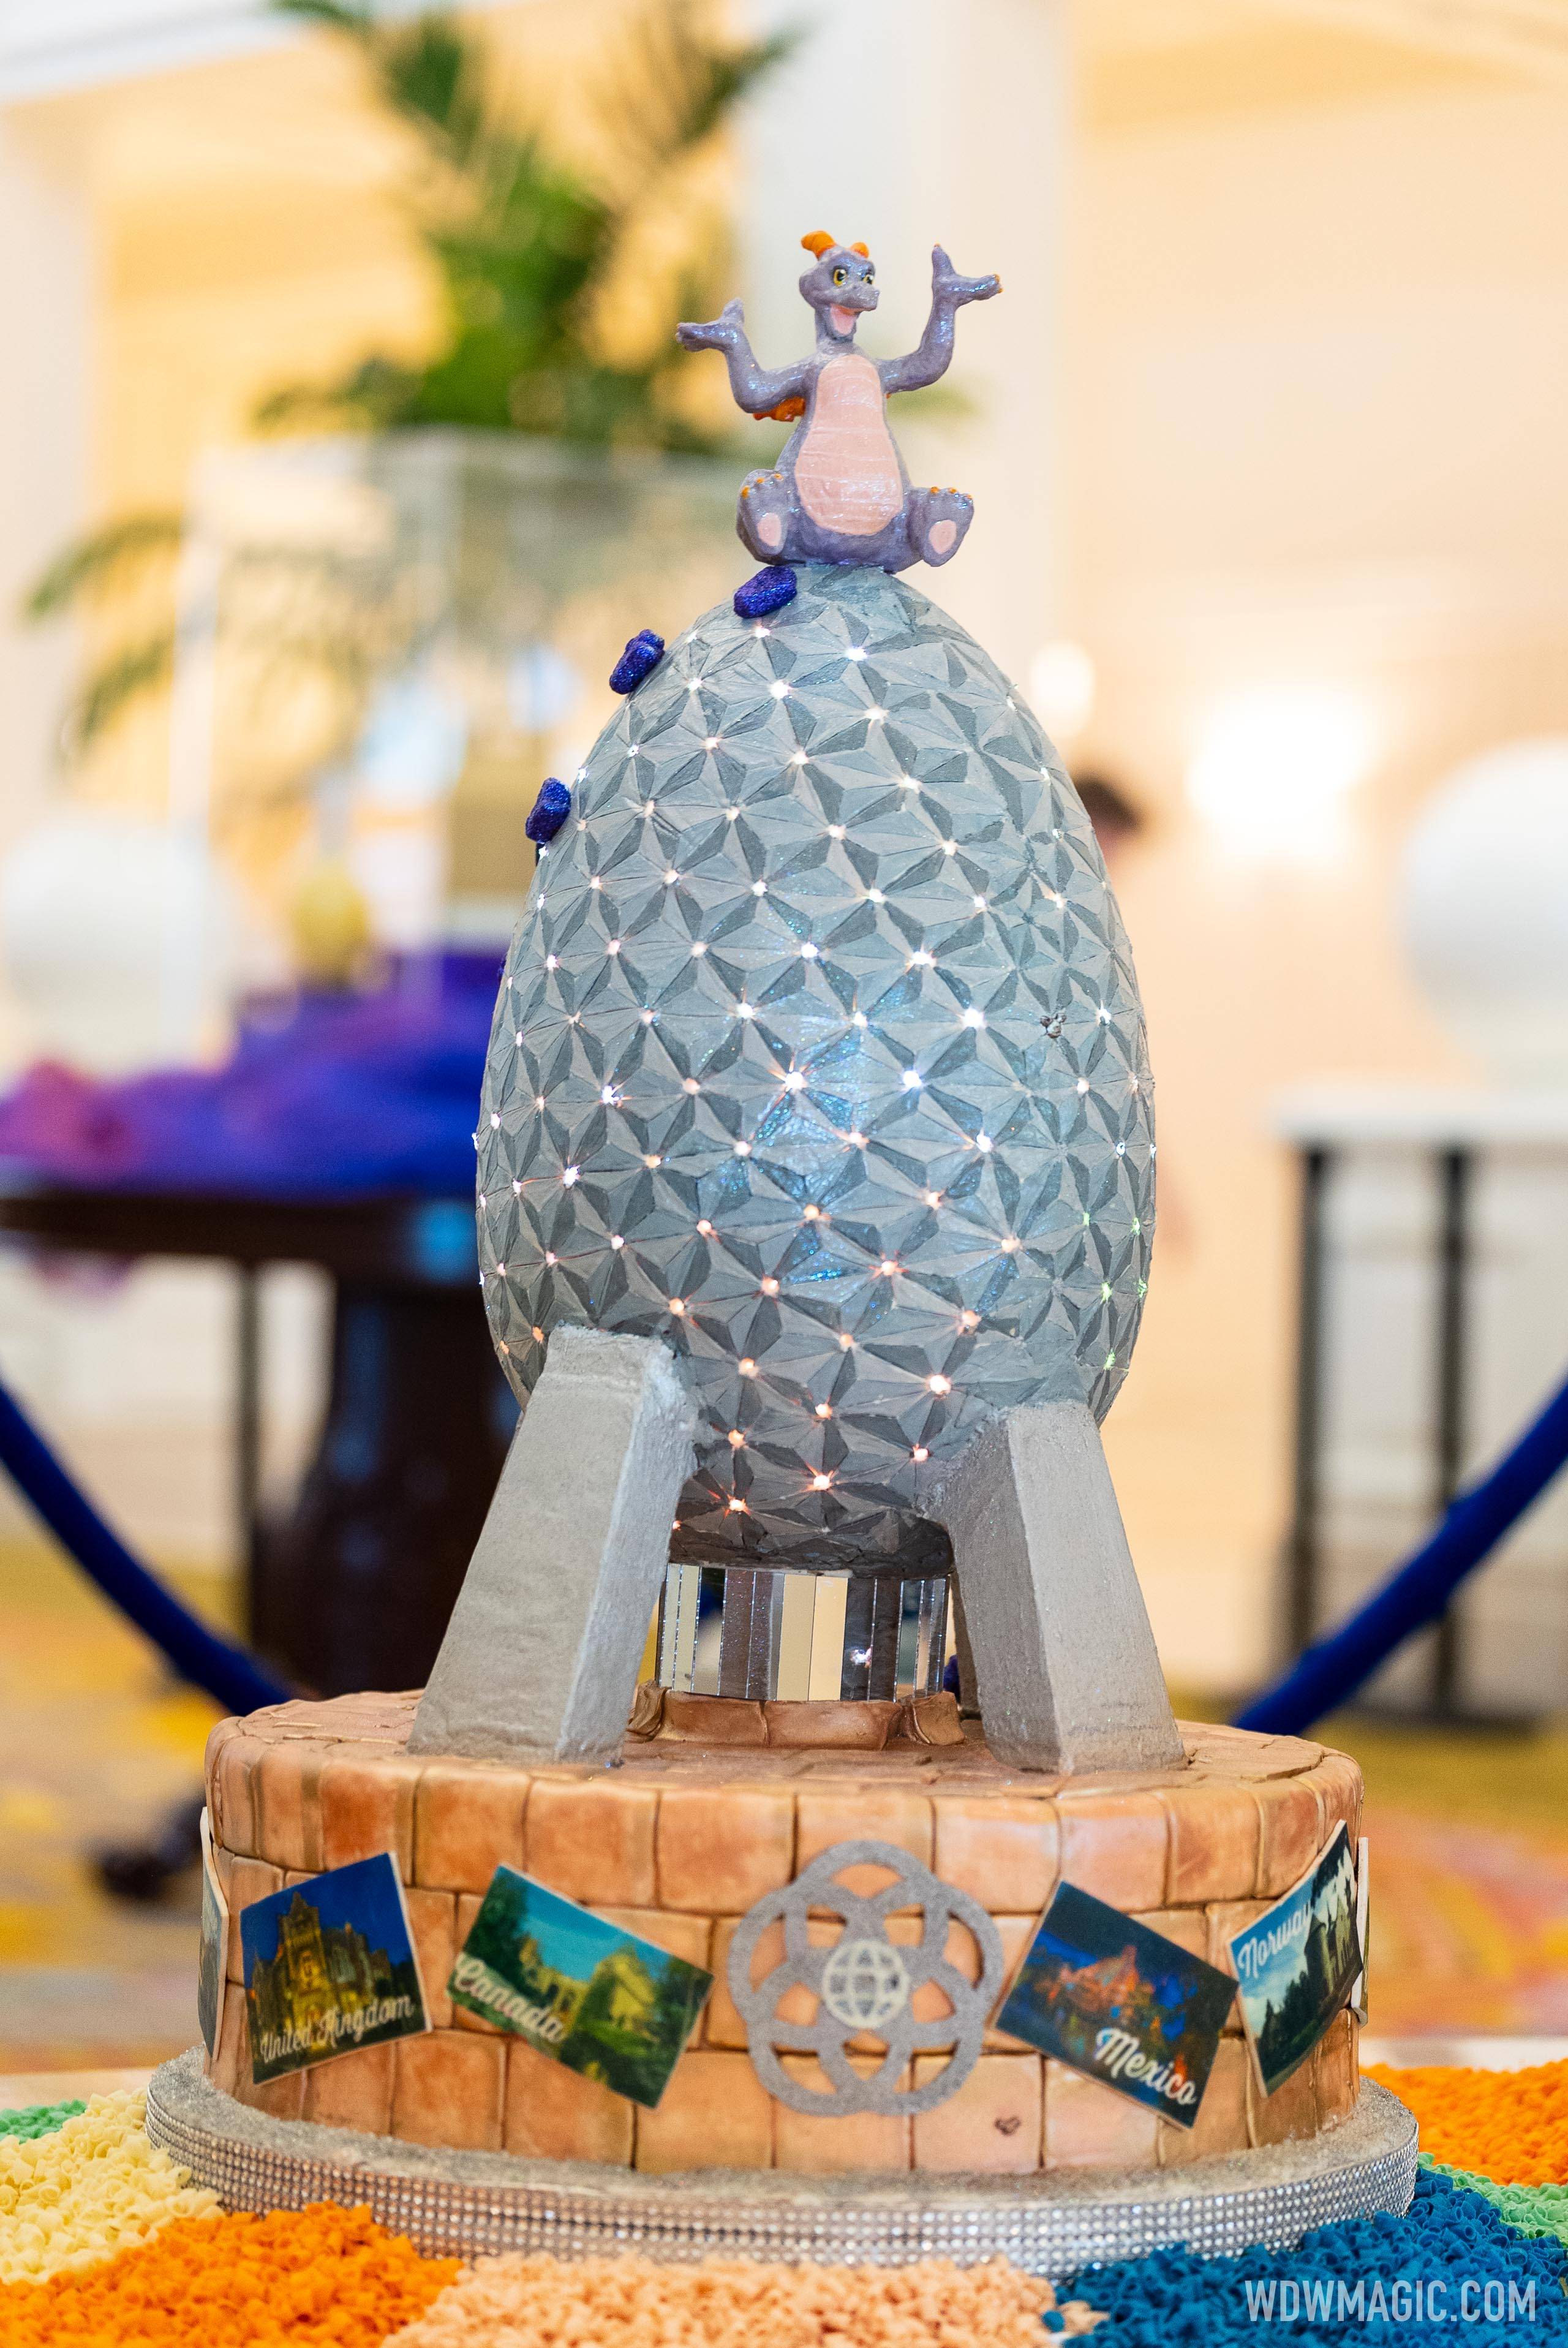 The Grand Cottage and Easter Egg display at Disney's Grand Floridian Resort